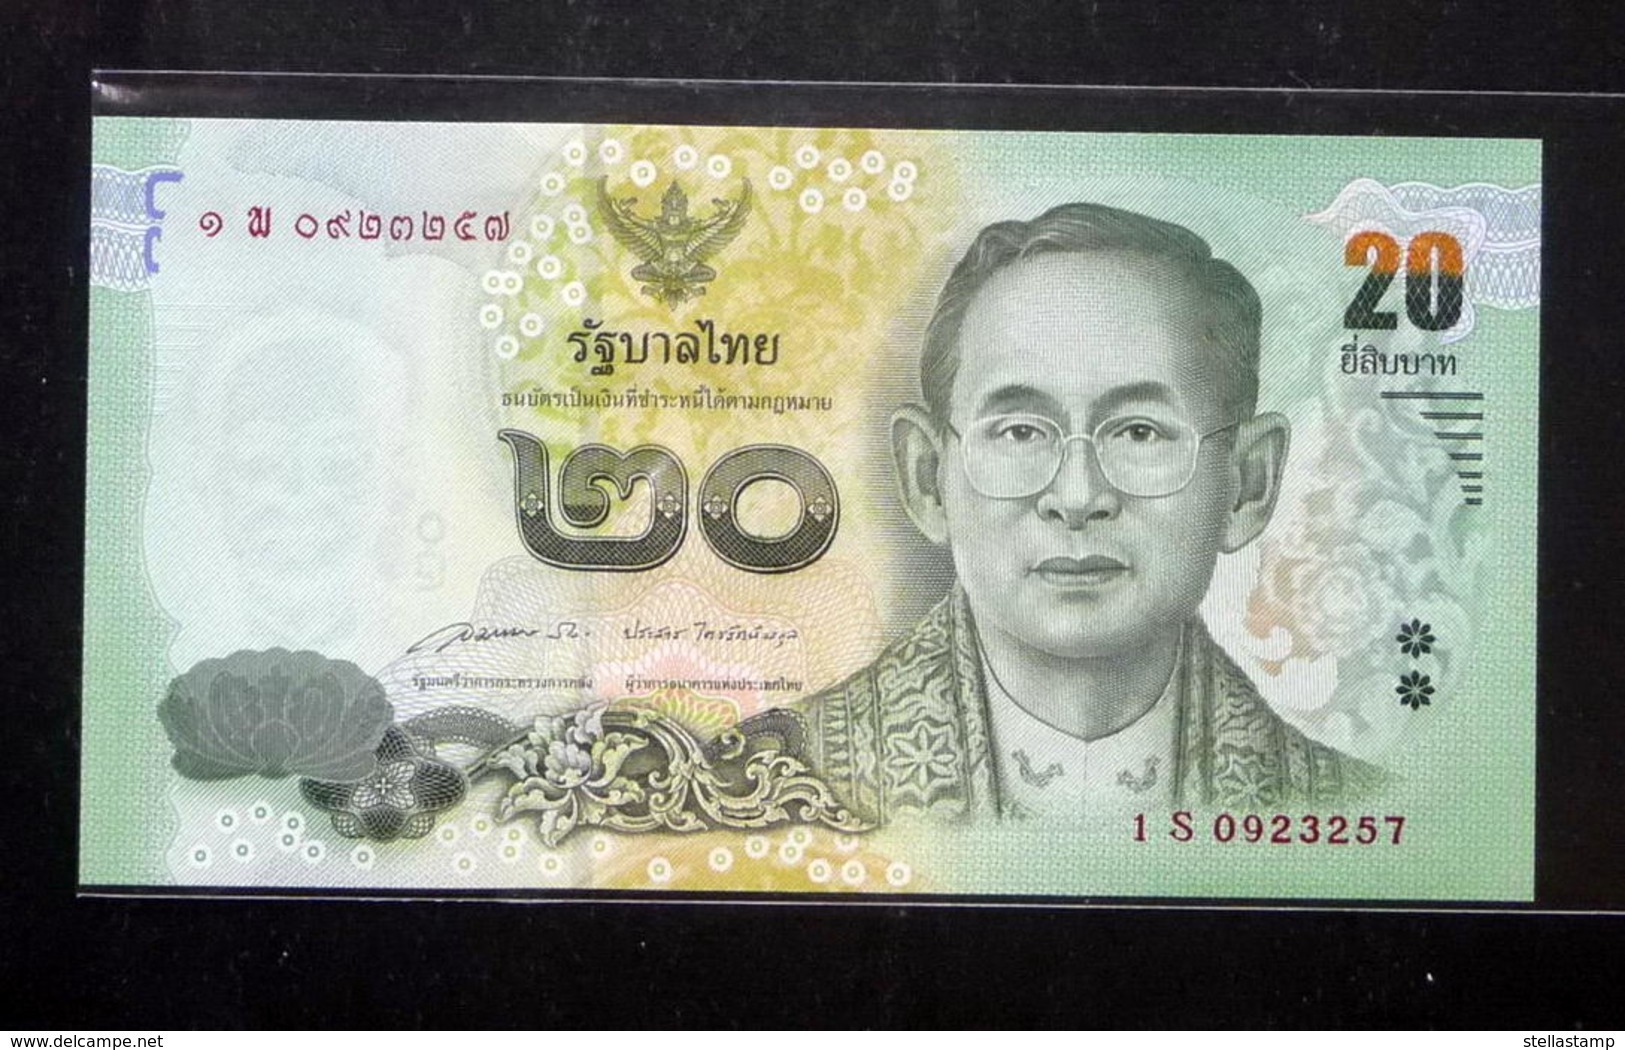 Thailand Banknote 20 Baht Series 16 P#123 SIGN#85 Replacement 1S&#xE1E; UNC - Thailand